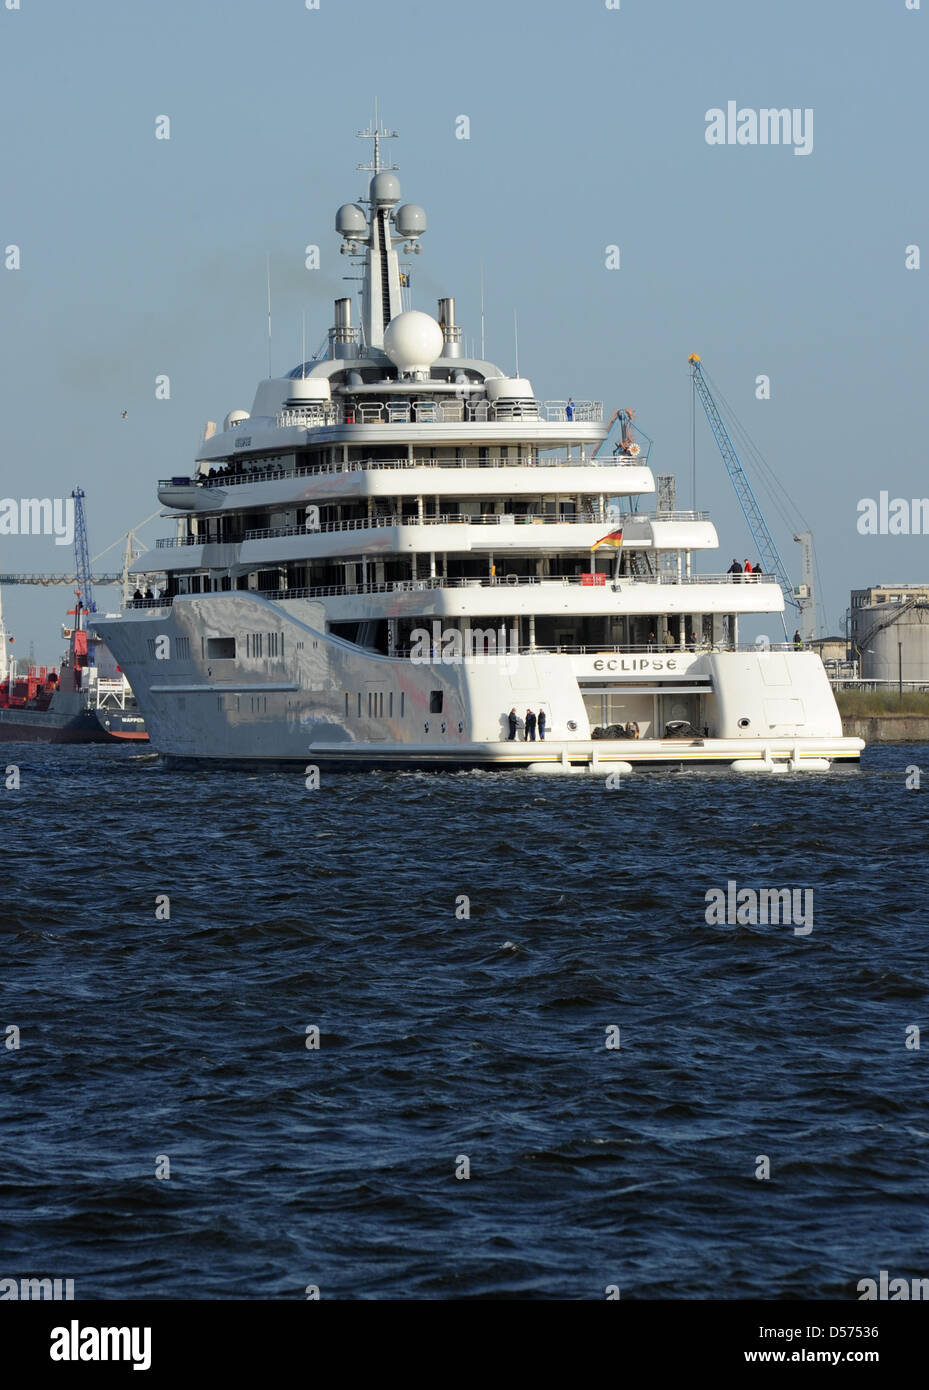 Luxury yacht 'Eclipse', which is allegedly owned by Russian billionaire Roman Abramowitsch, leaves dock 10 of Blohm+Voss shipyards in Hamburg, Germany, 16 April 2010. The yacht features nine decks, one pool, a disco, 20 Jet-Skis, four motorboats and two helicopter landing areas. According to experts the ship is the most expensive privately owned yacht in the world, with an estimate Stock Photo